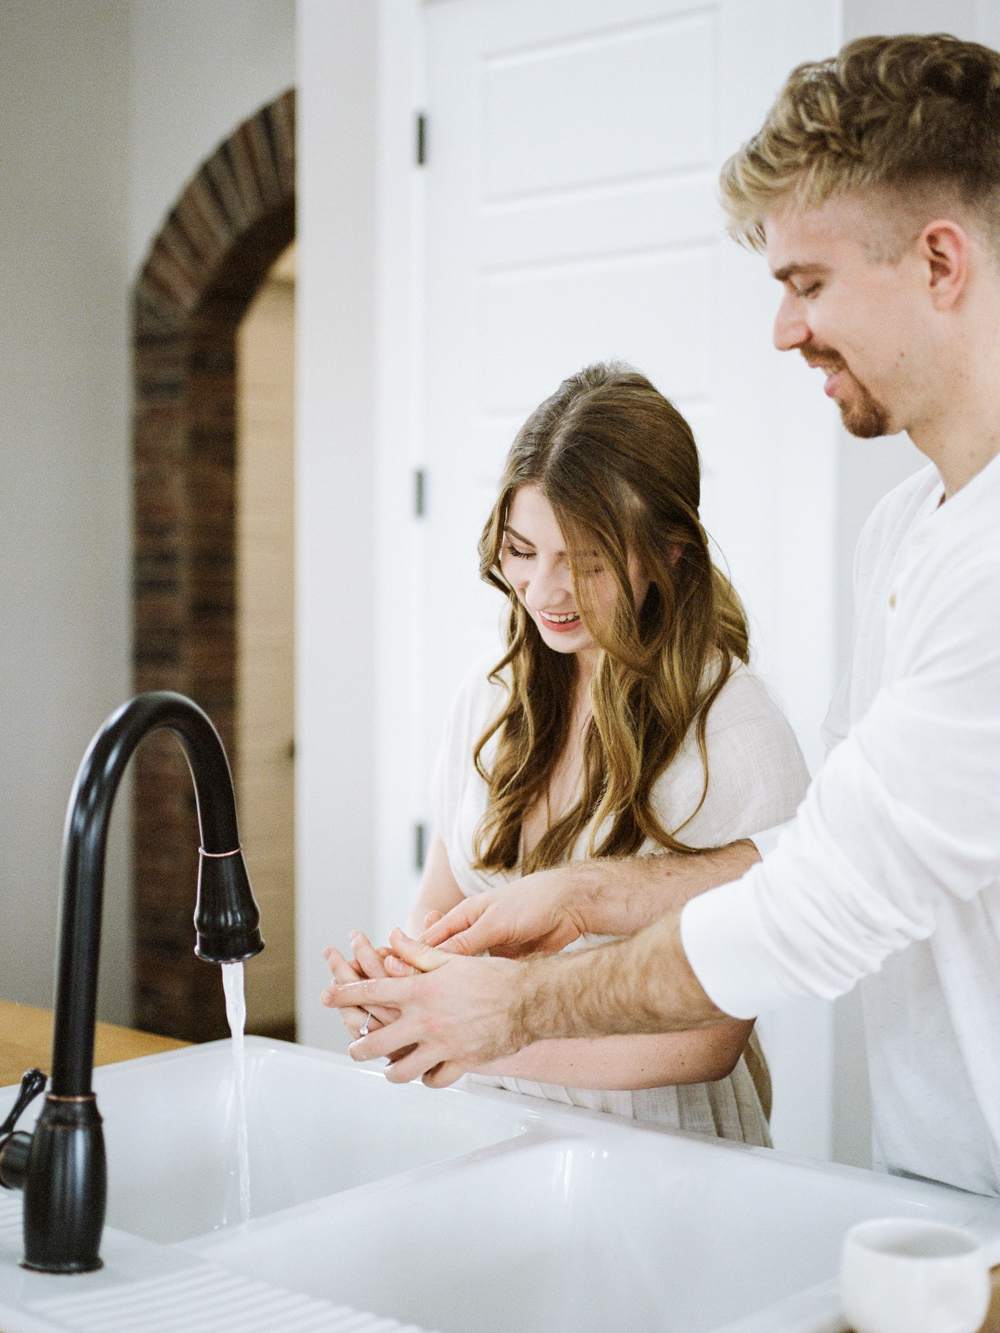 at home engagement session - Christine Gosch - featured on Magnolia Rouge - film photographer - elopement and intimate wedding photographer-9.jpg